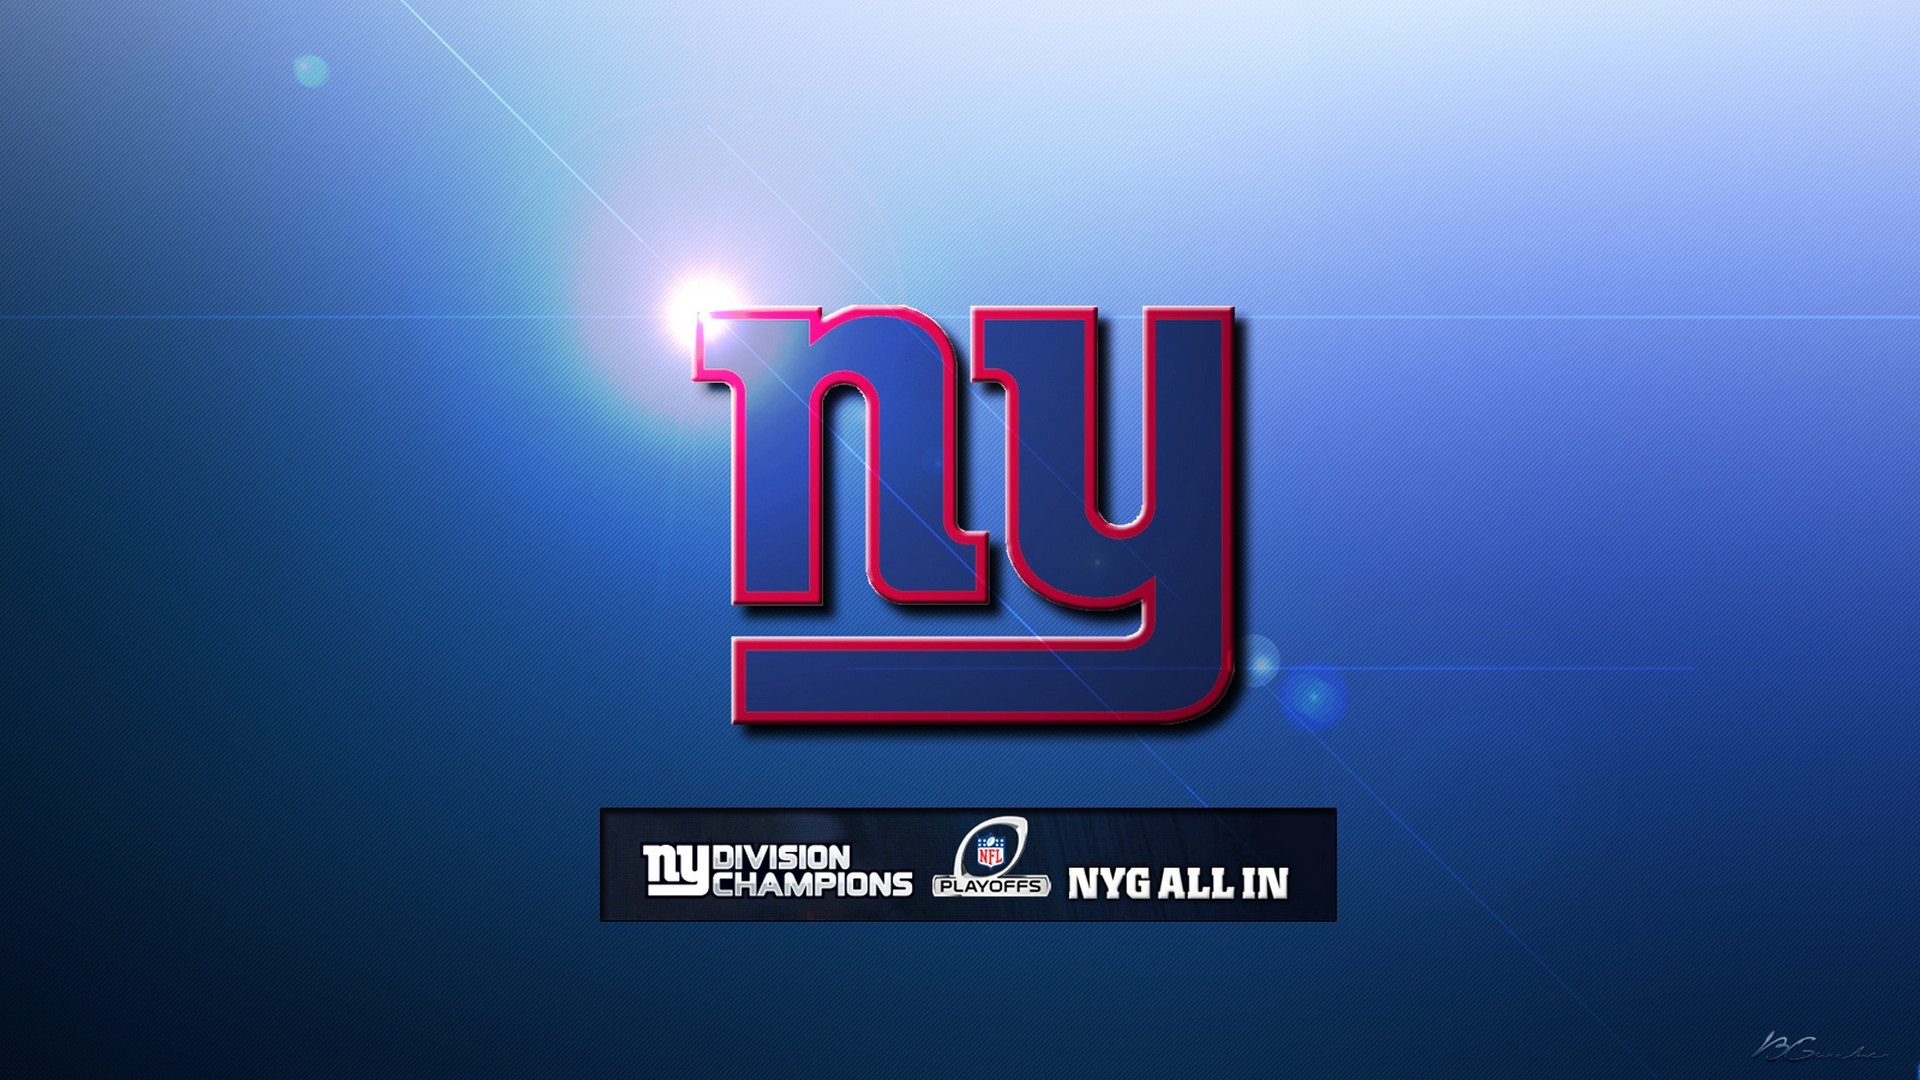 Wallpapers New York Giants with high-resolution 1920x1080 pixel. You can use this wallpaper for your Mac or Windows Desktop Background, iPhone, Android or Tablet and another Smartphone device